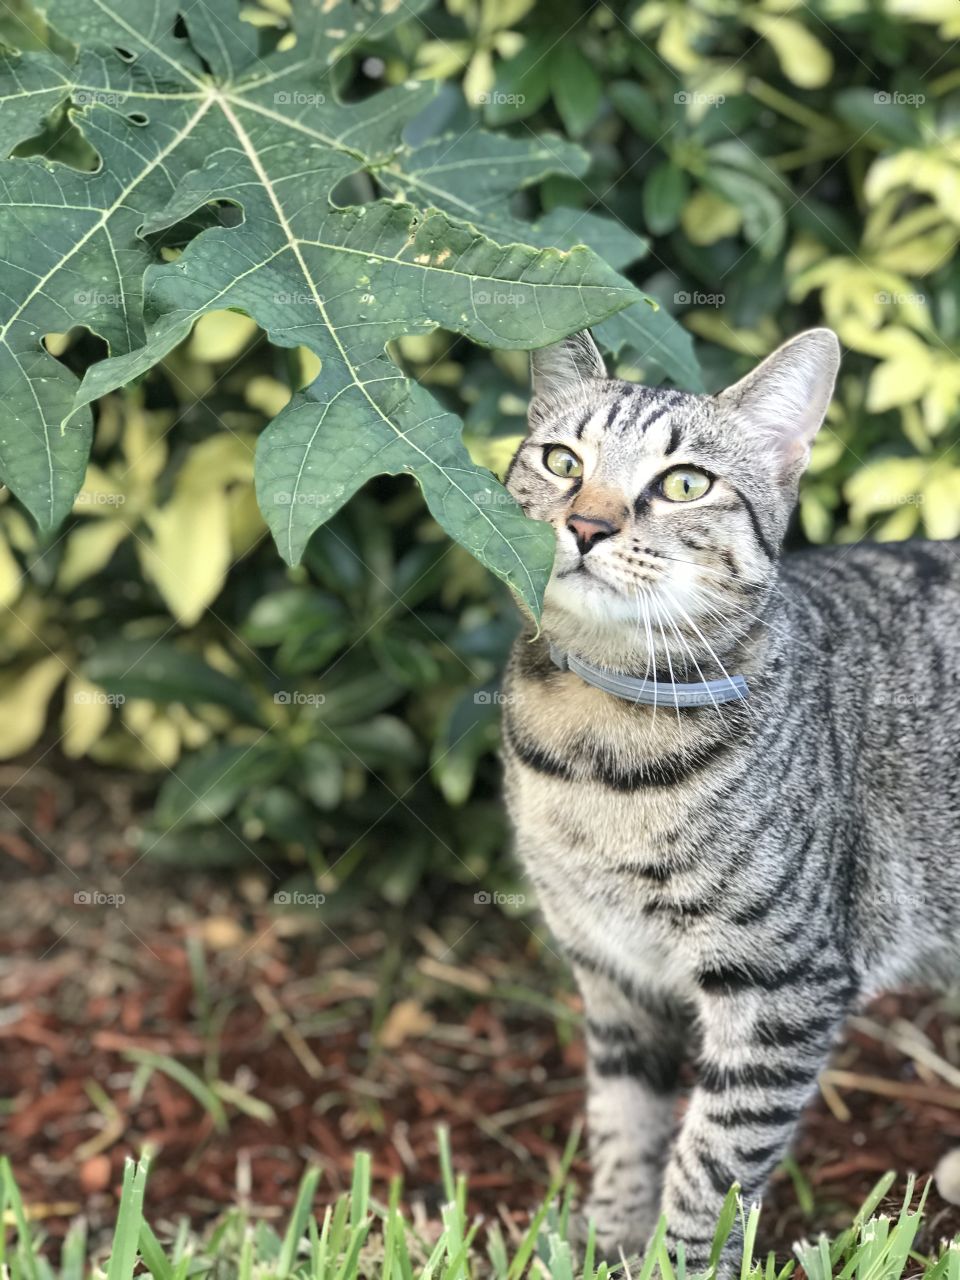 Our cat Sisu modeling next to our papaya tree in the garden. 